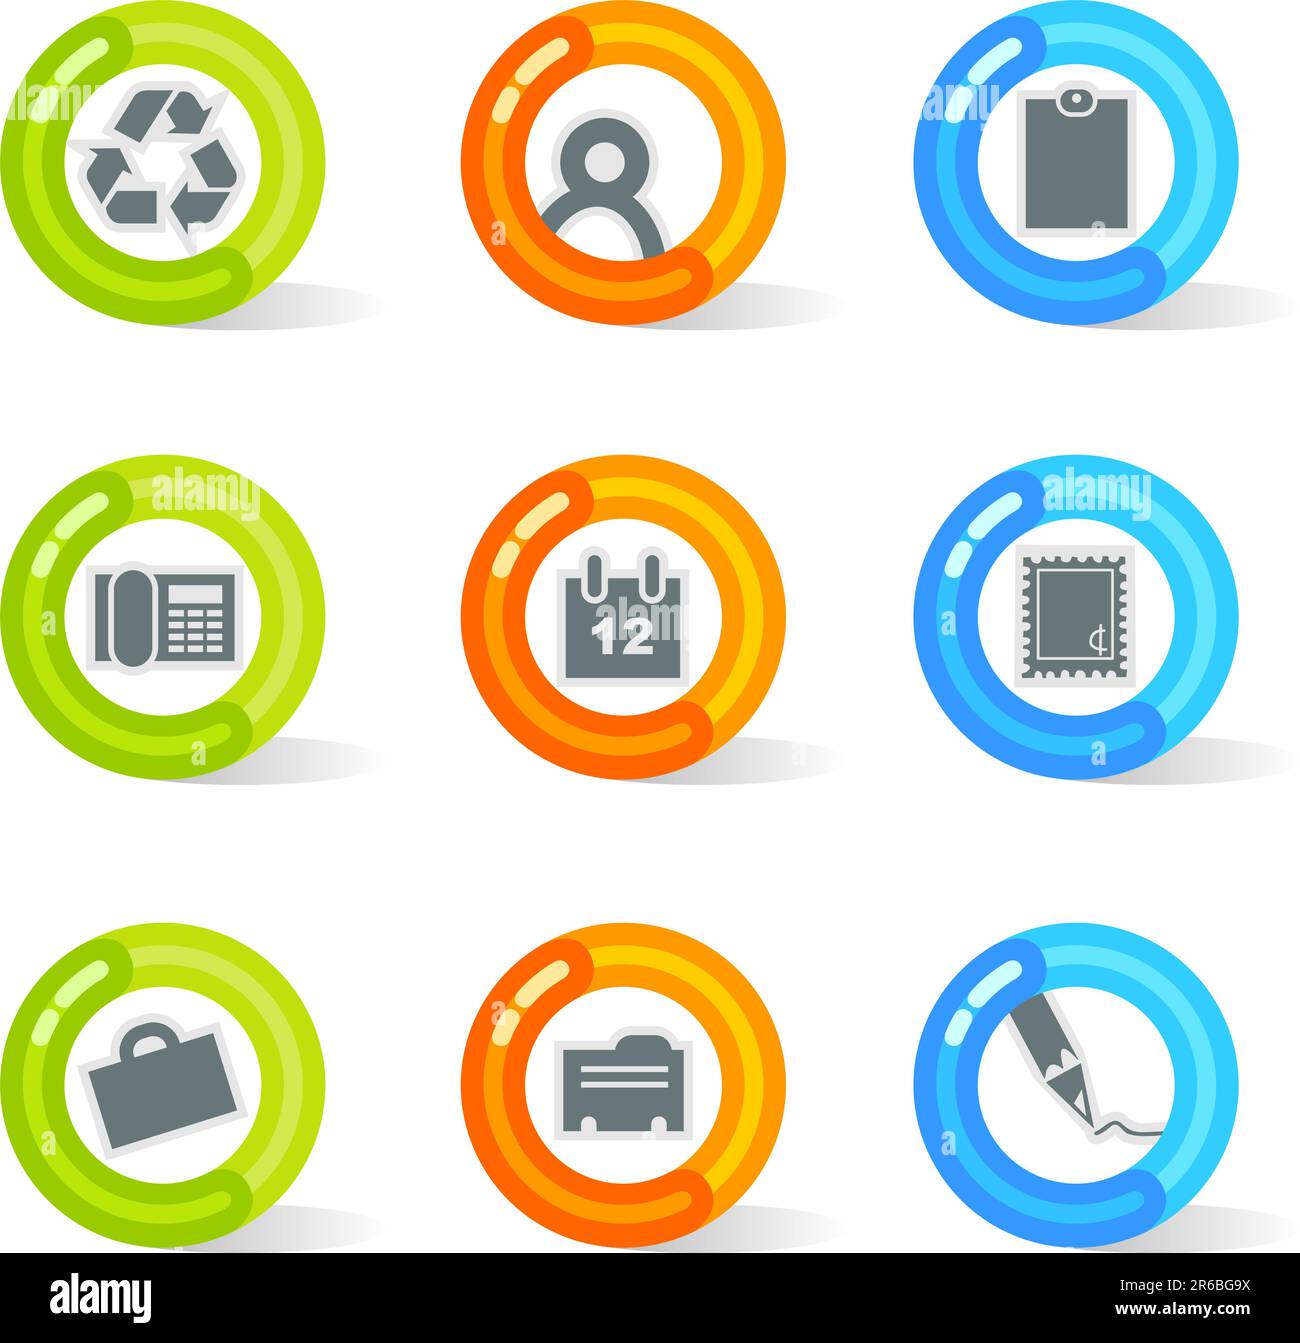 Stylish colorful gel Icons with device symbols; easy edit layered files. Stock Vector